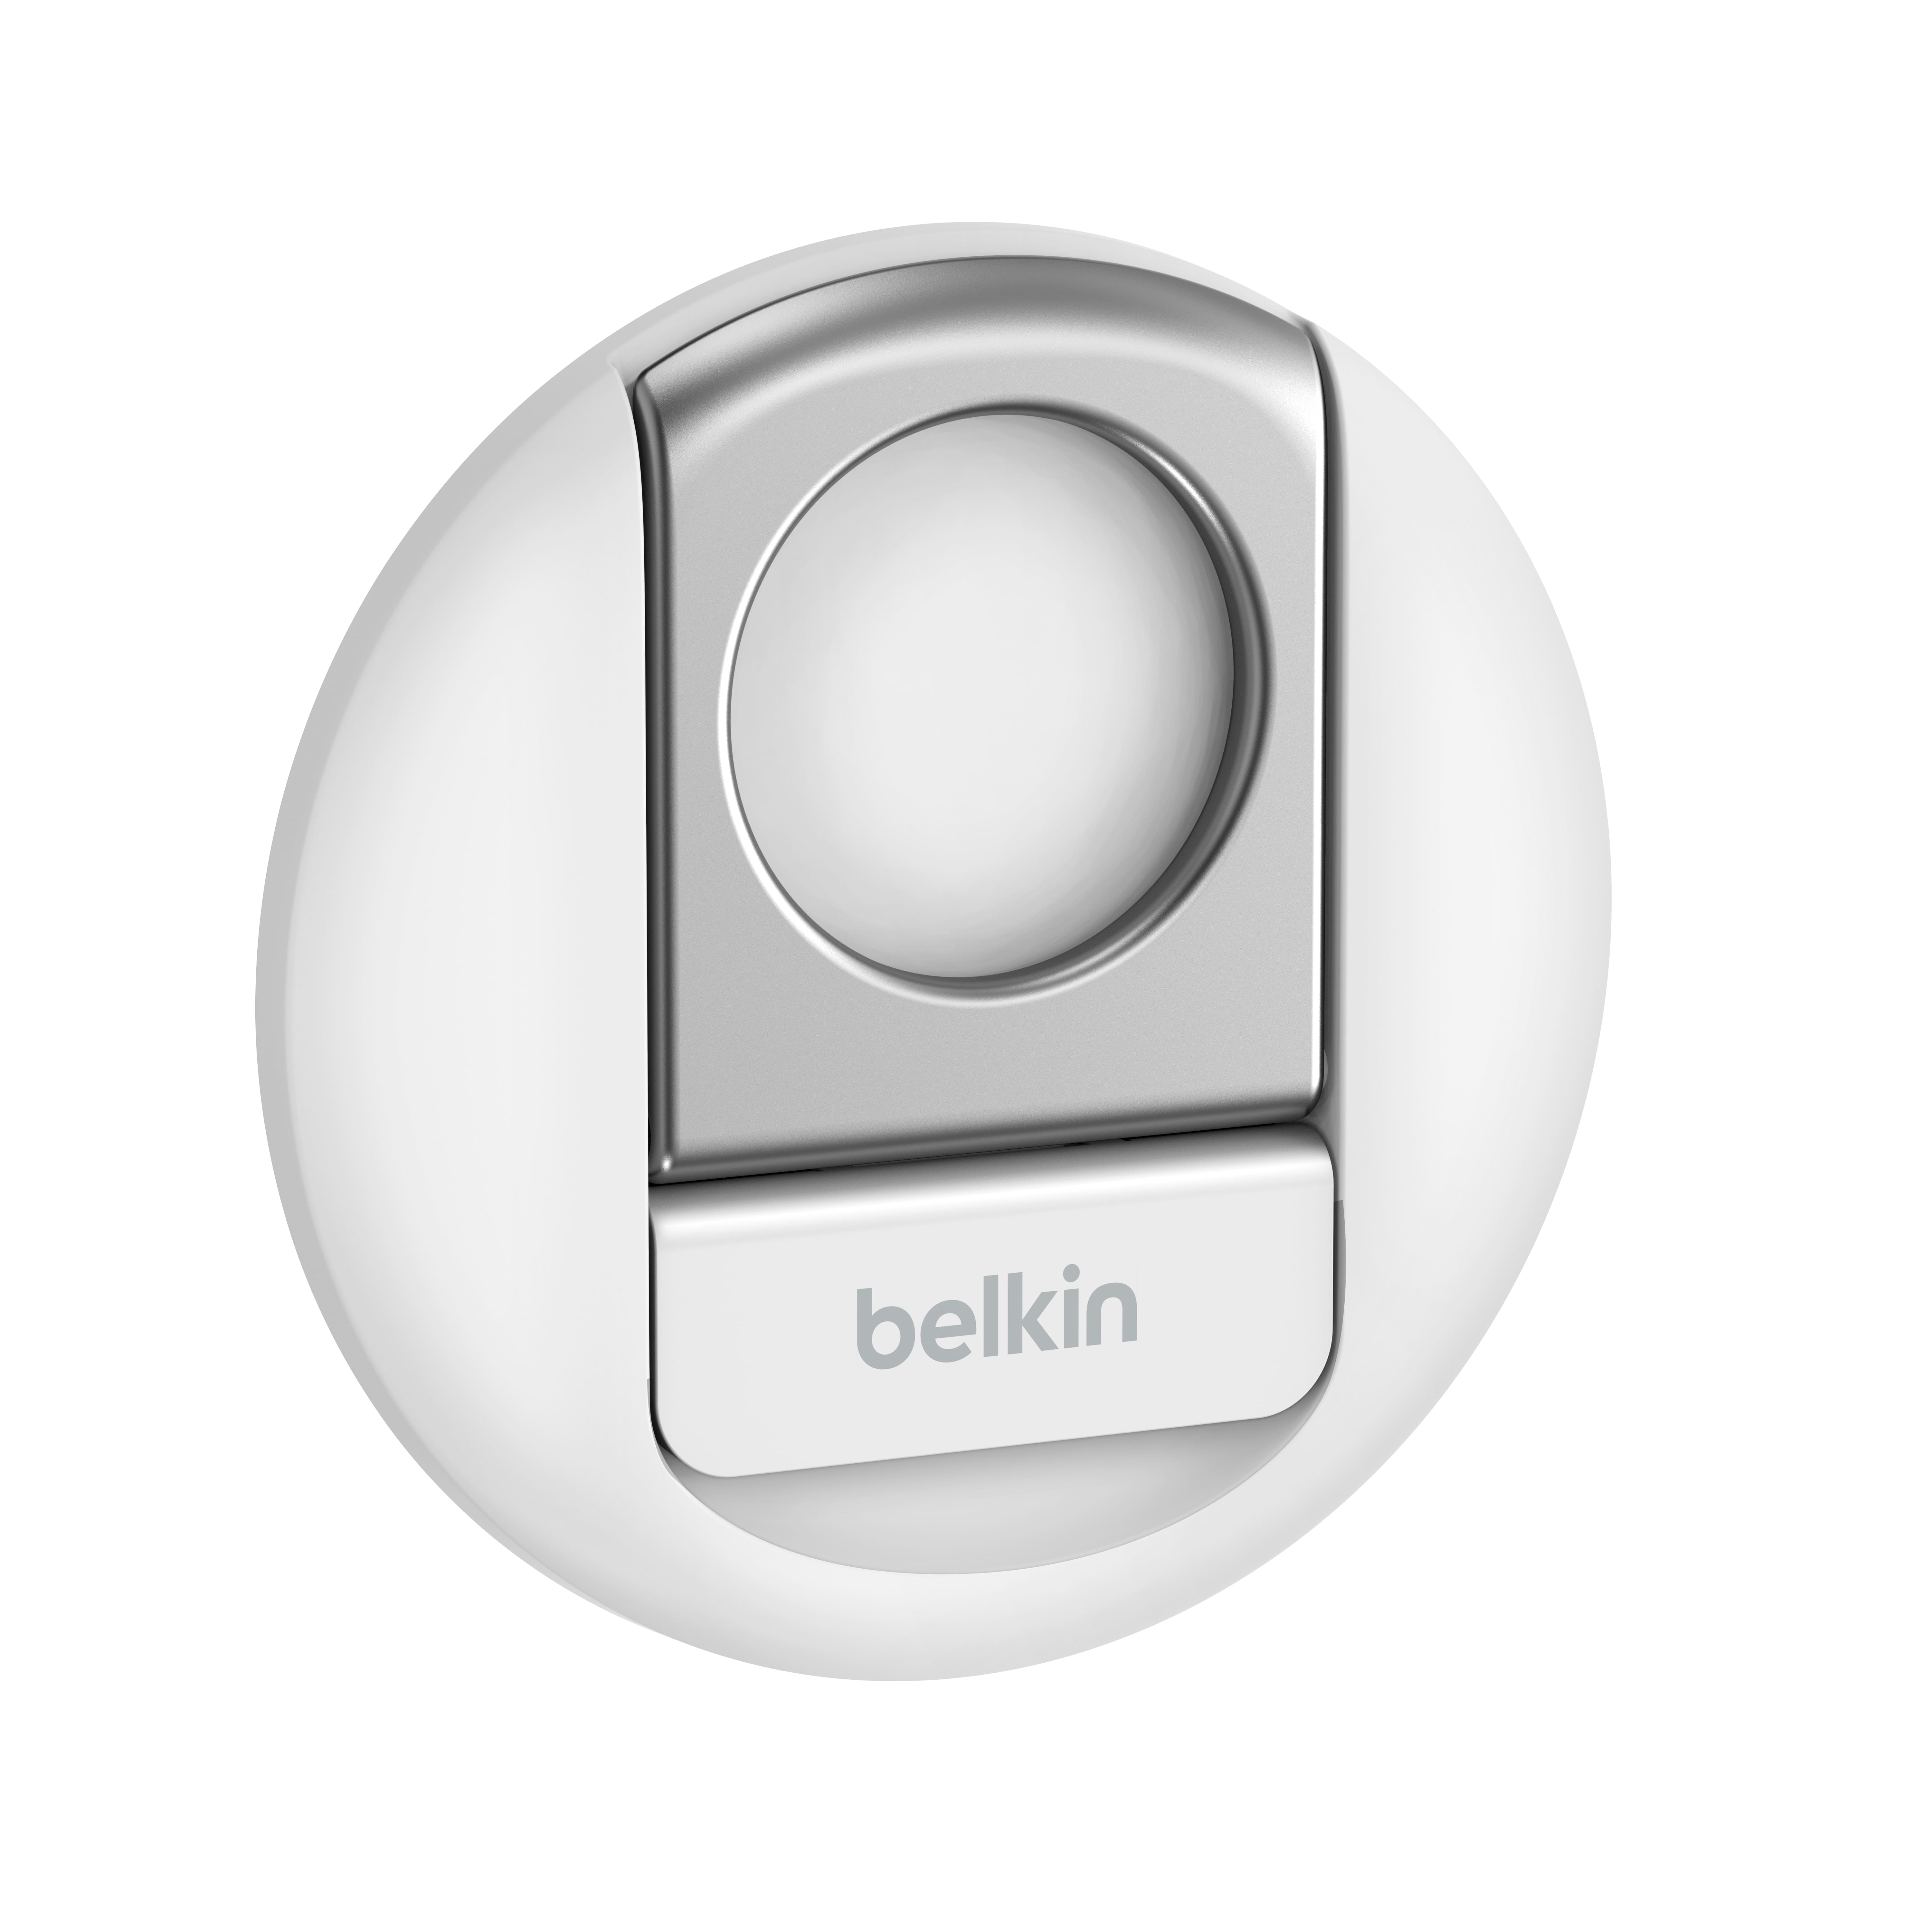 Belkin iPhone Mount with MagSafe for Mac Notebooks, , large image number 1